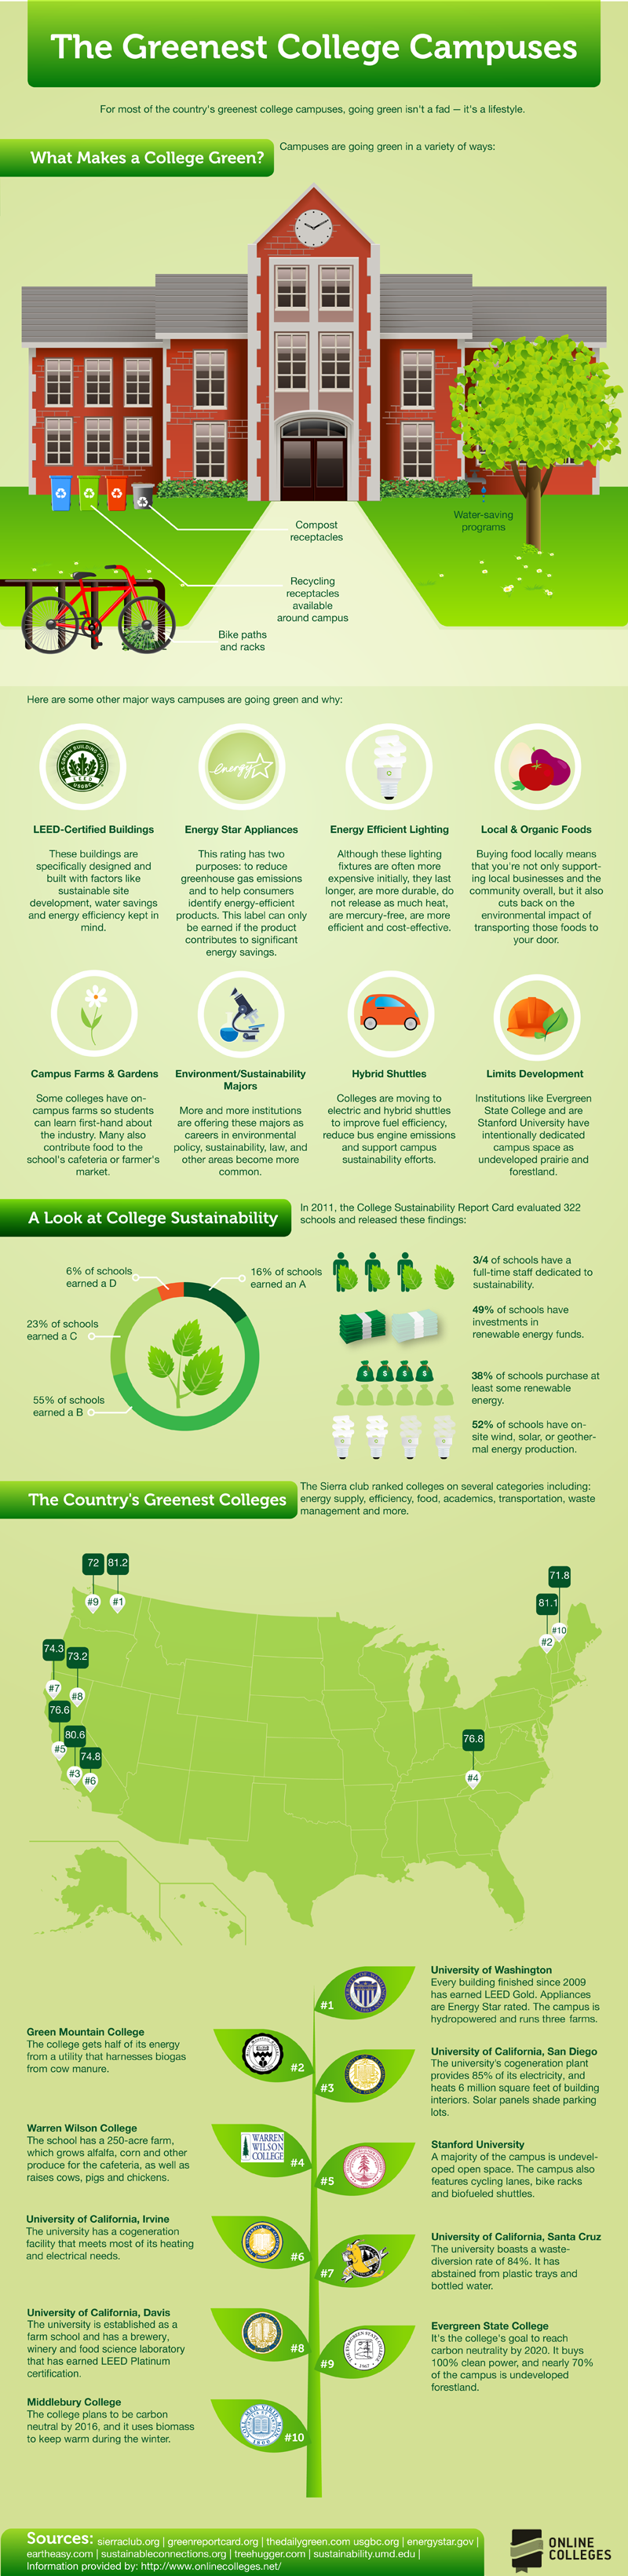 InfoGraphic on the Greenest College Campuses in the US,